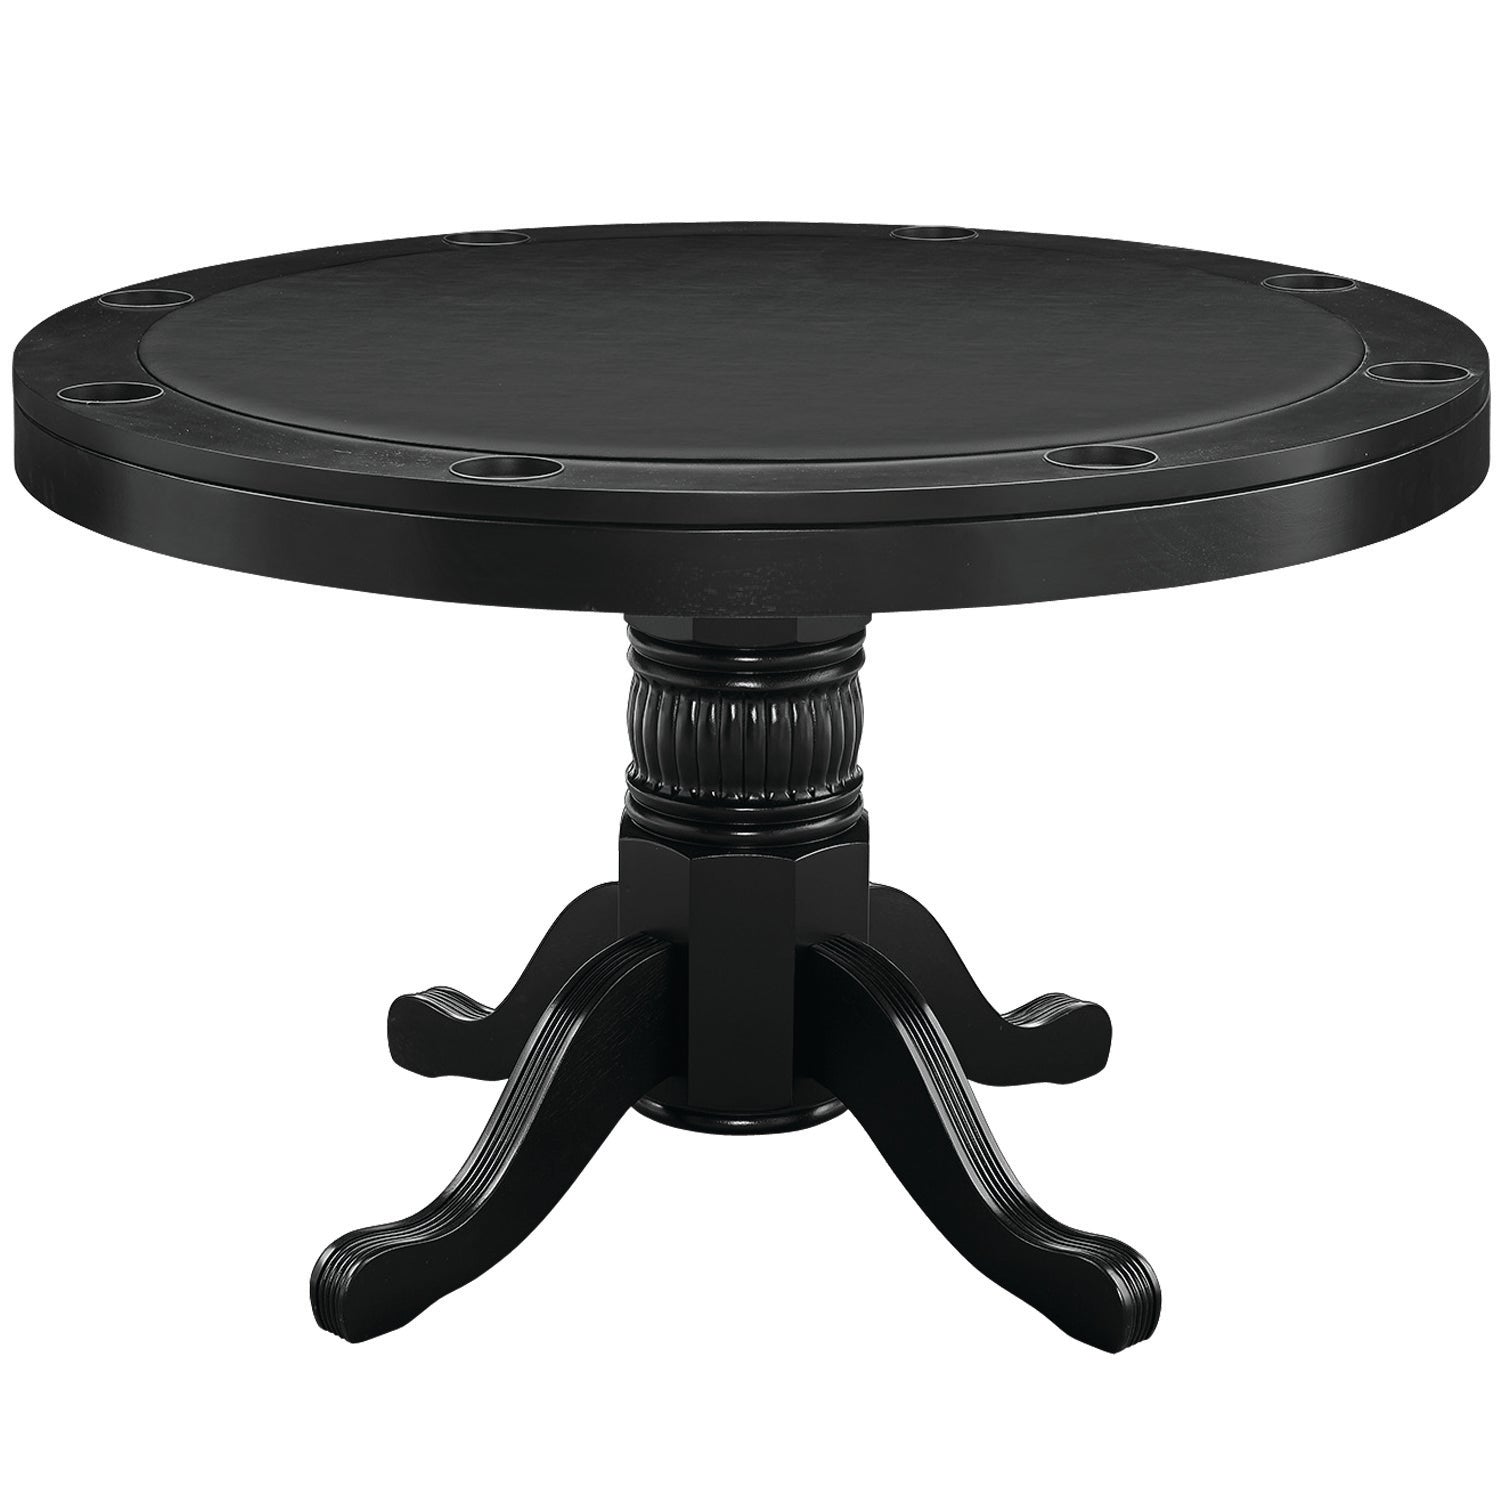 Round convertible game table with a black padded vinyl game top in a black finish.